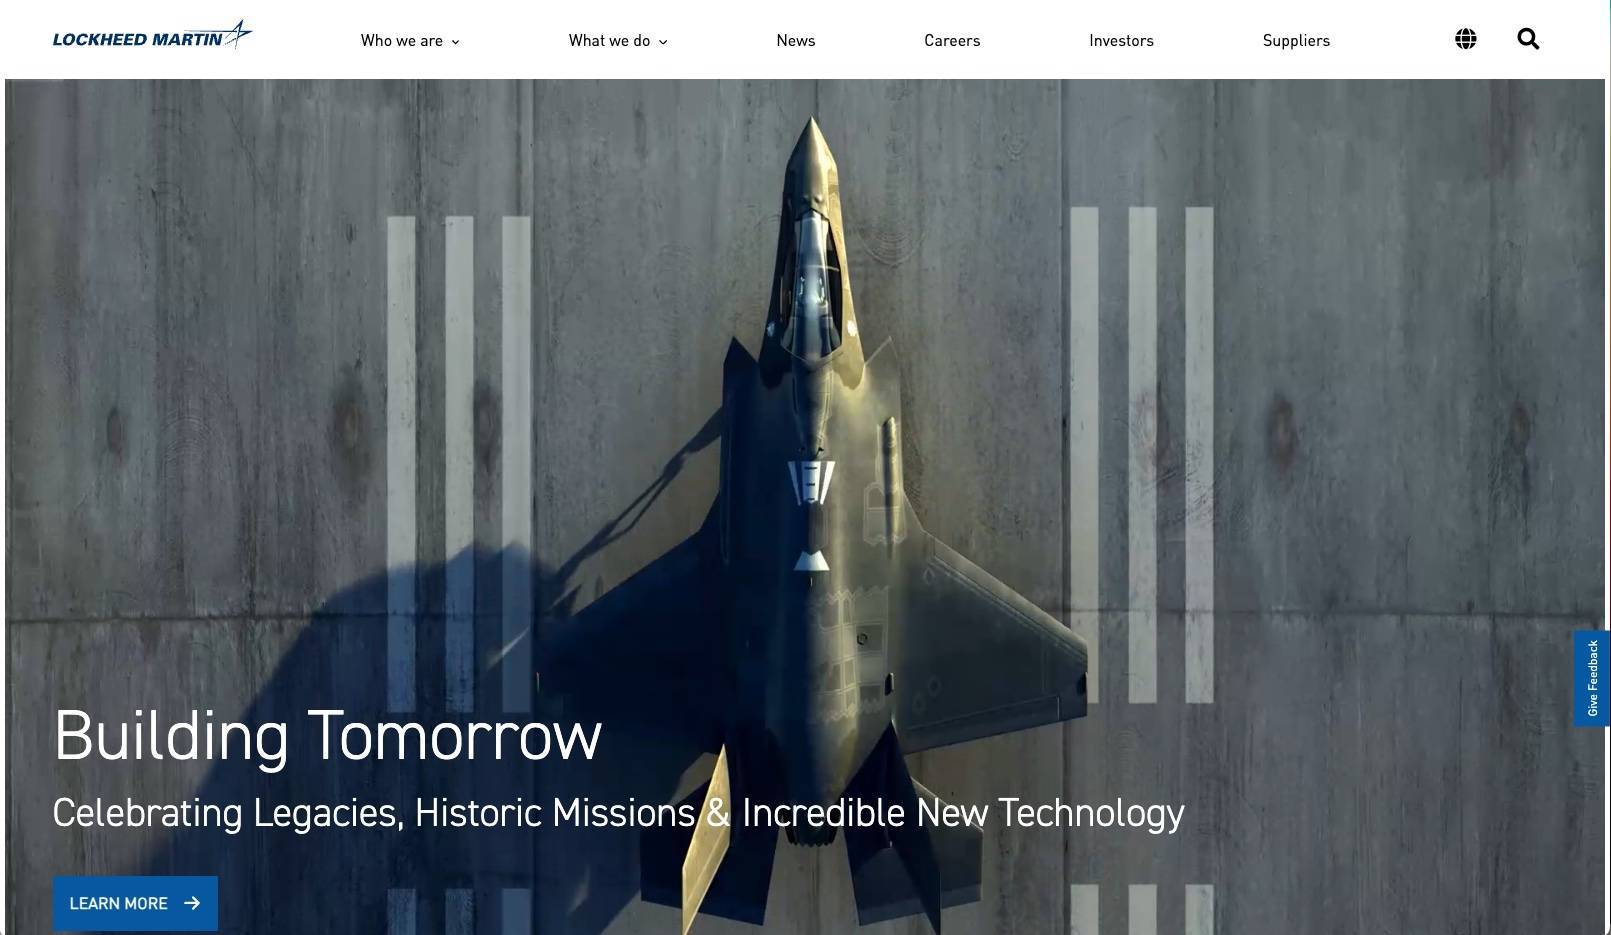 image of the Lockheed Martin manufacturing website homepage featuring high quality photo of an aircraft 